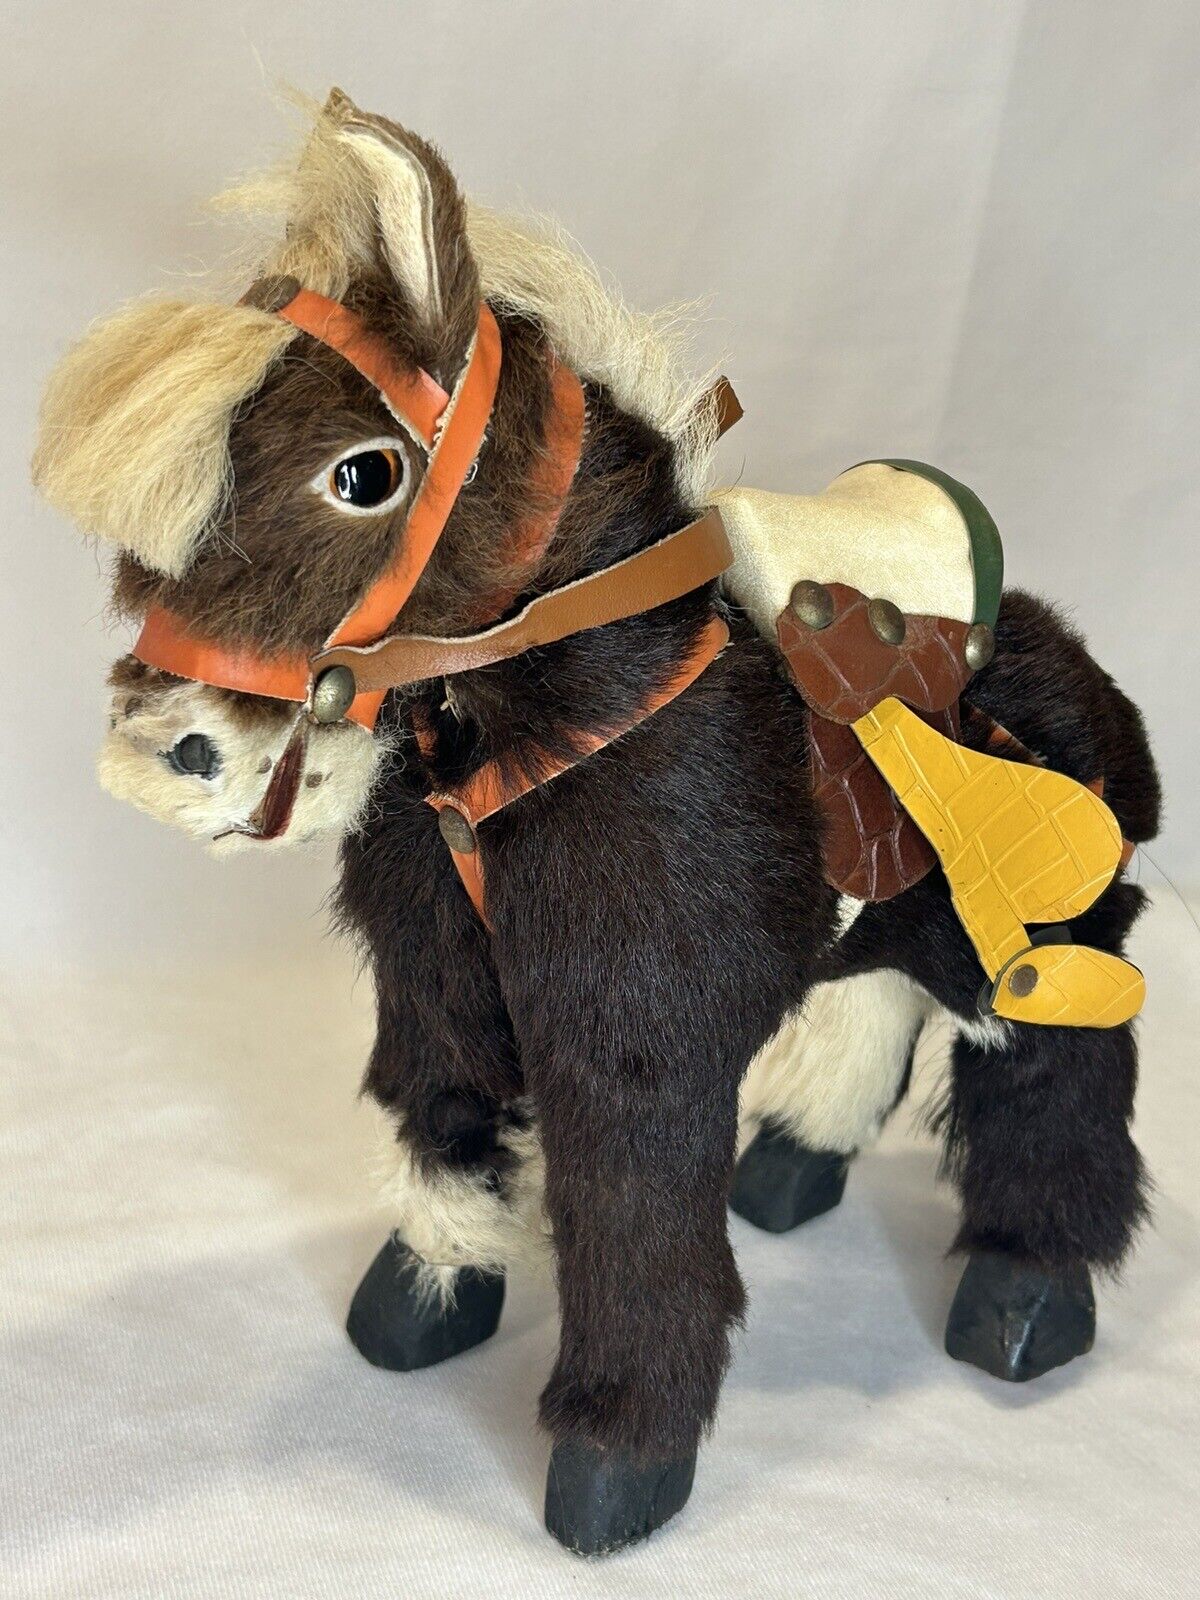 Vintage Handmade Wooden Horse With Real Hair And Leather Amazing Details